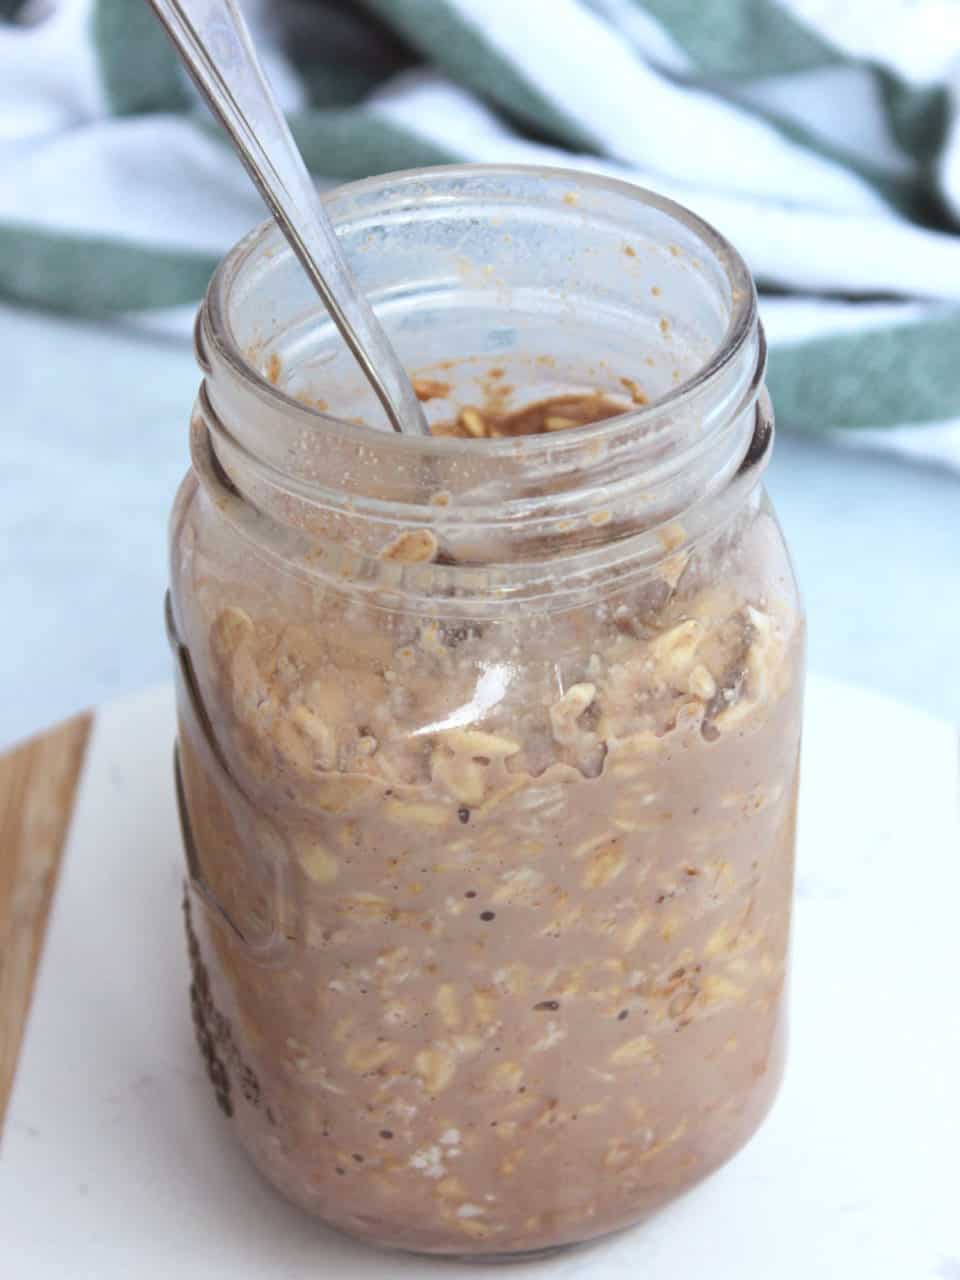 A spoon in a jar of overnight oats without topping.